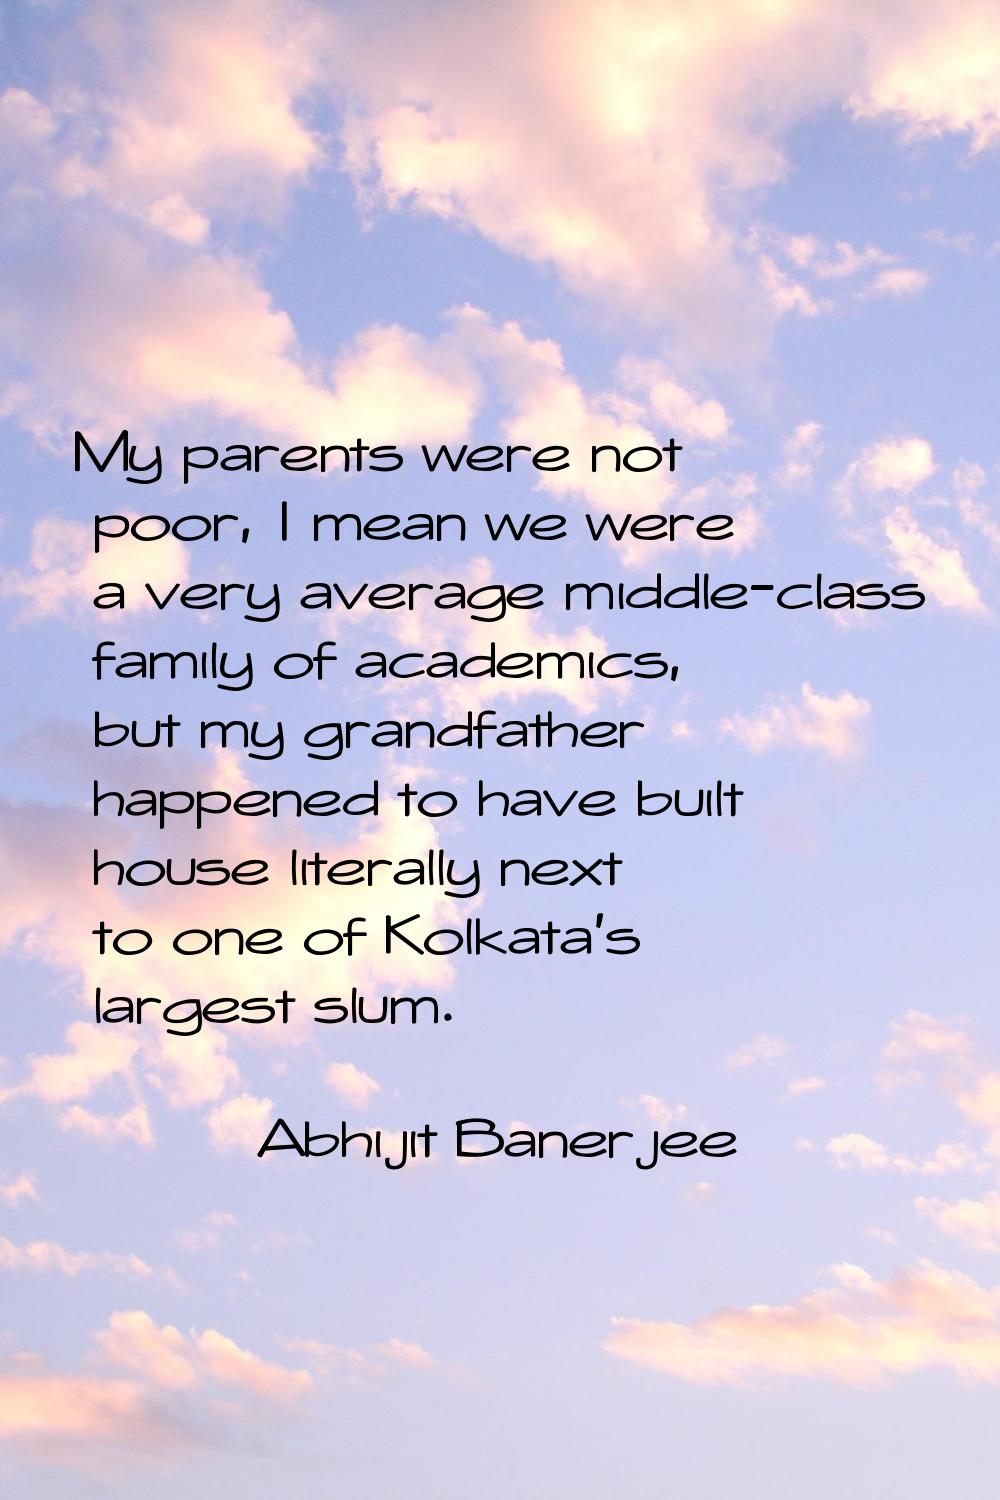 My parents were not poor, I mean we were a very average middle-class family of academics, but my gr